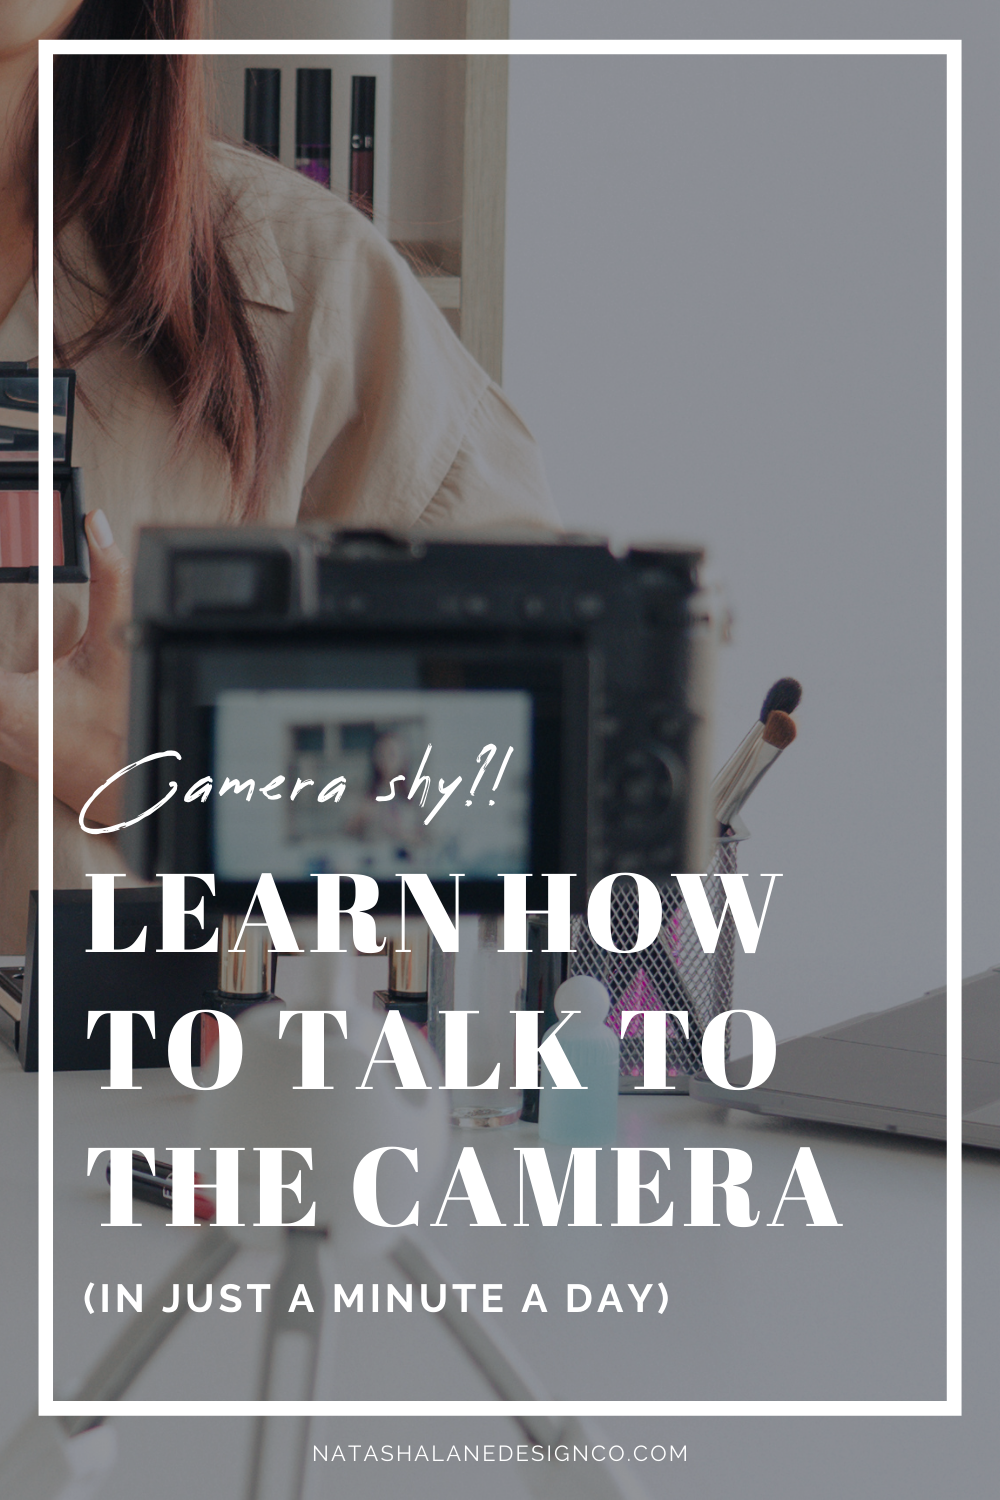 Learn how to talk to the camera (in just a minute a day)